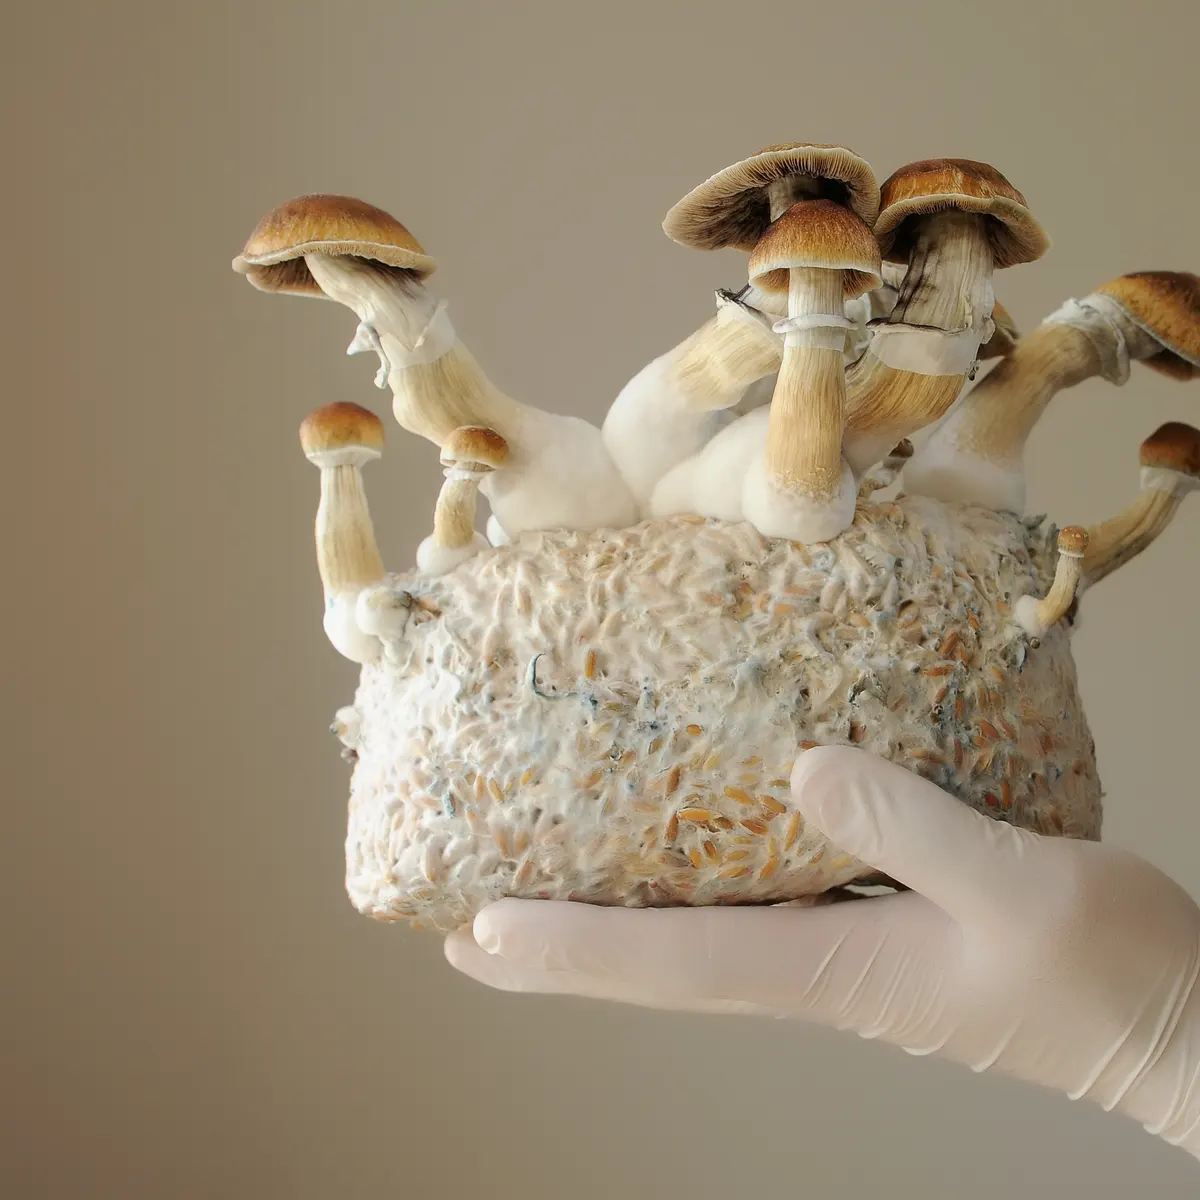 Just One Dose of Mushroom Can Cure Your Depression for Weeks!